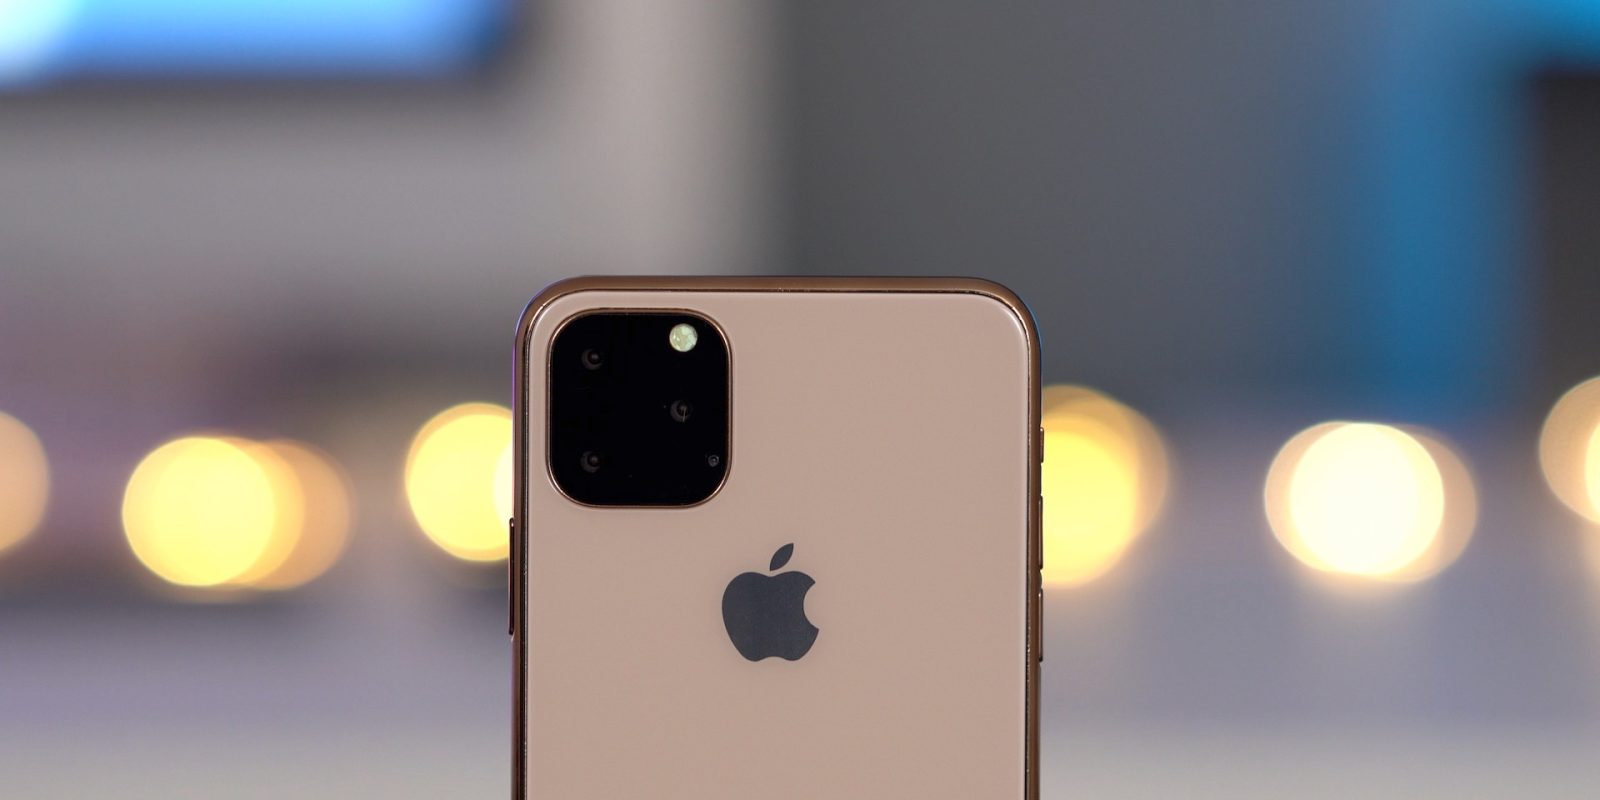 What We Can Expect From The New iPhone